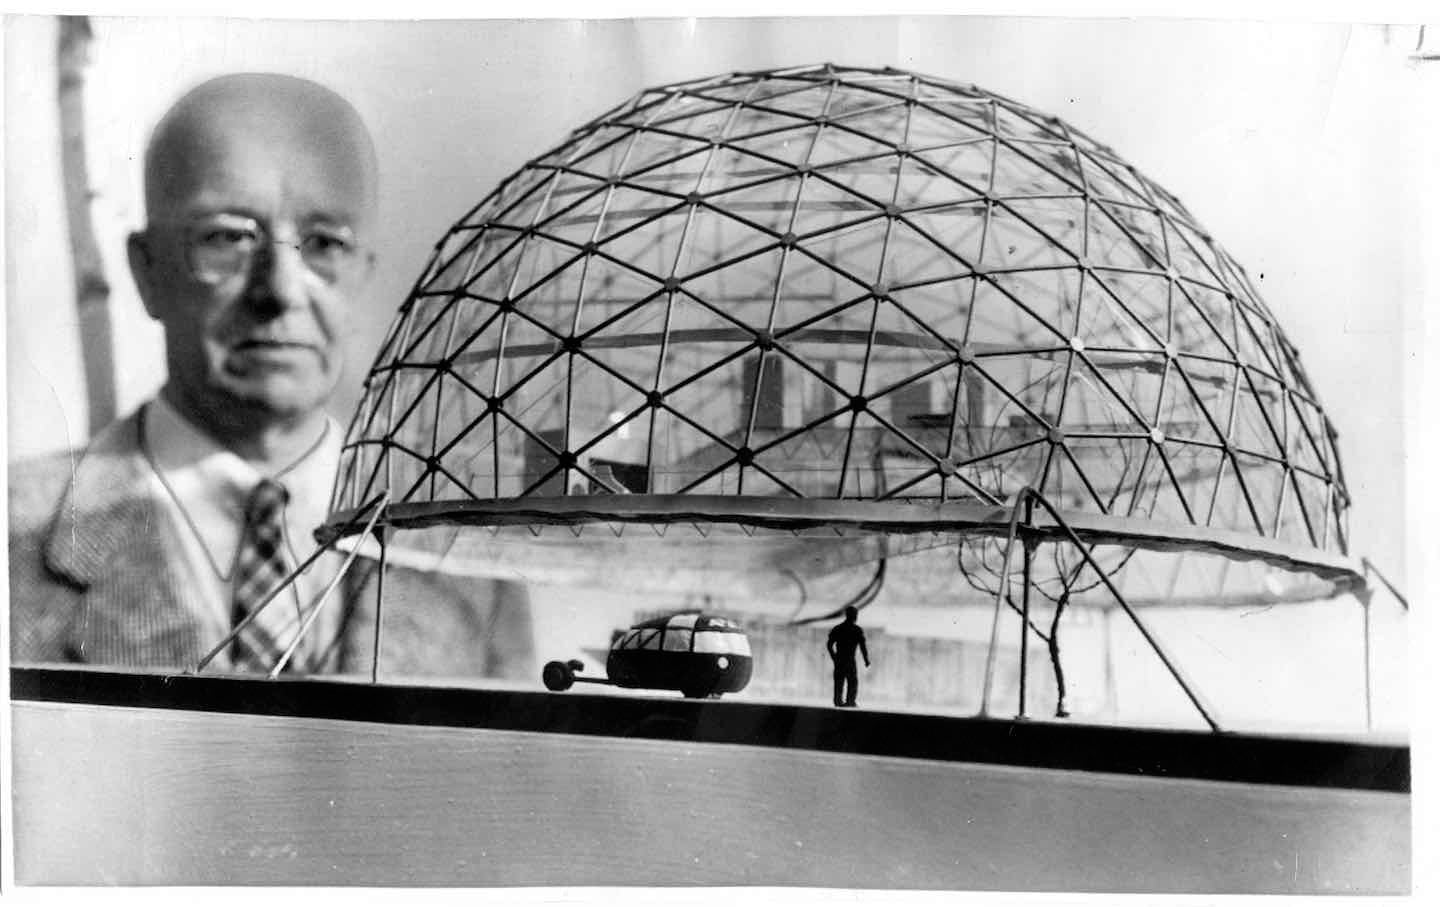 Celebrating Buckminster Fuller: The Visionary Behind "Doing More With Less"